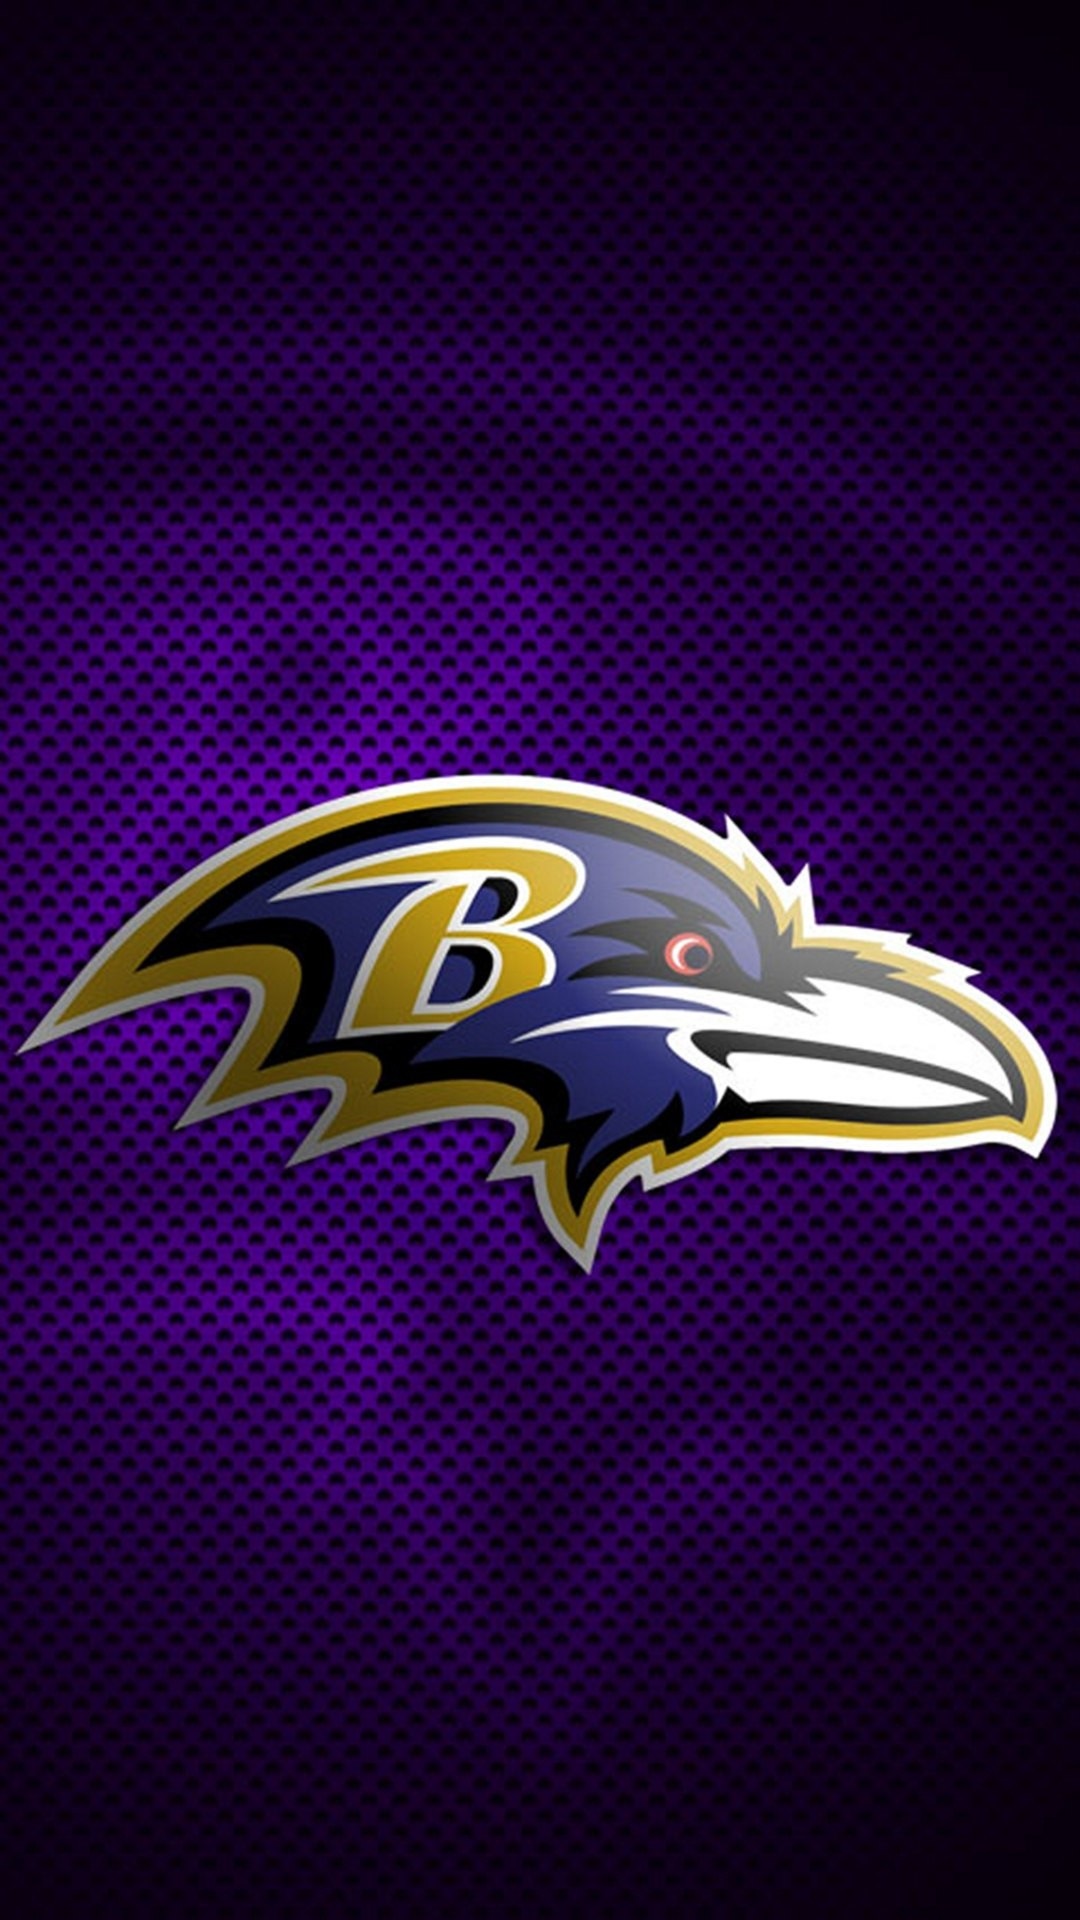 Baltimore Ravens iPhone Wallpaper with high-resolution 1080x1920 pixel. Download and set as wallpaper for Apple iPhone X, XS Max, XR, 8, 7, 6, SE, iPad, Android